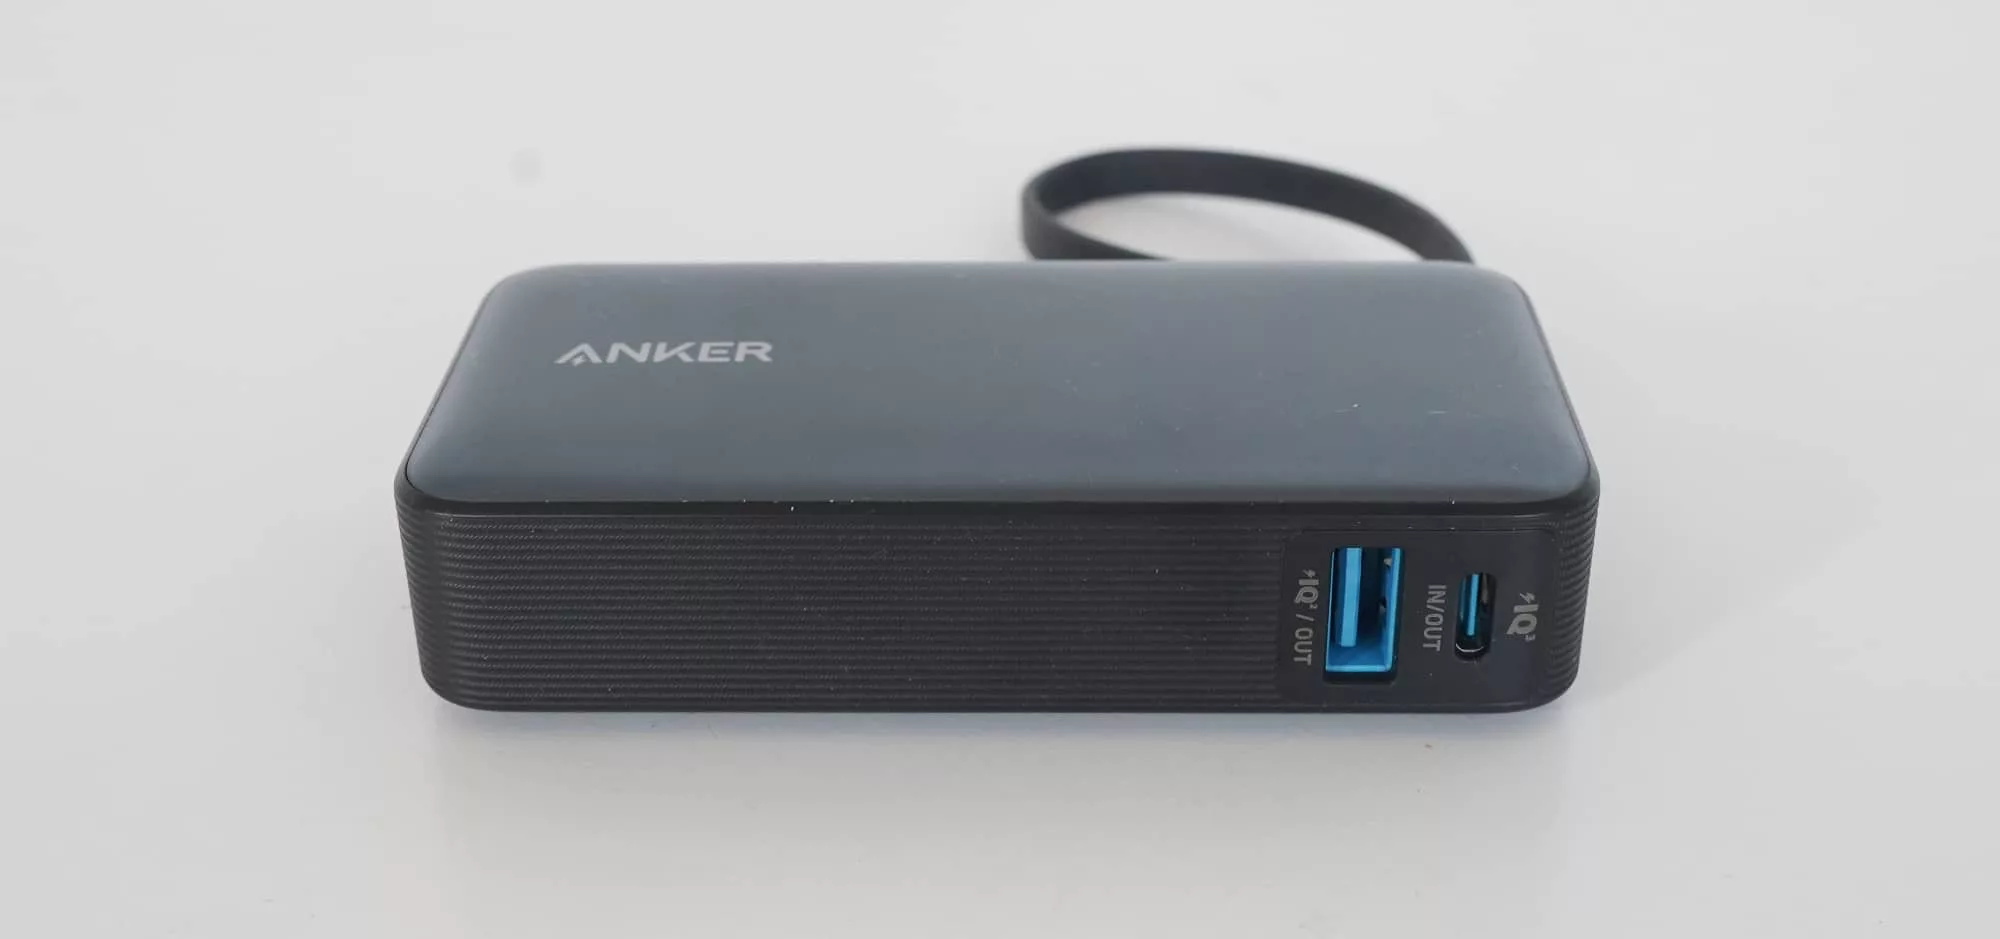 Save 30% on this Anker Nano Power Bank at  - TheStreet